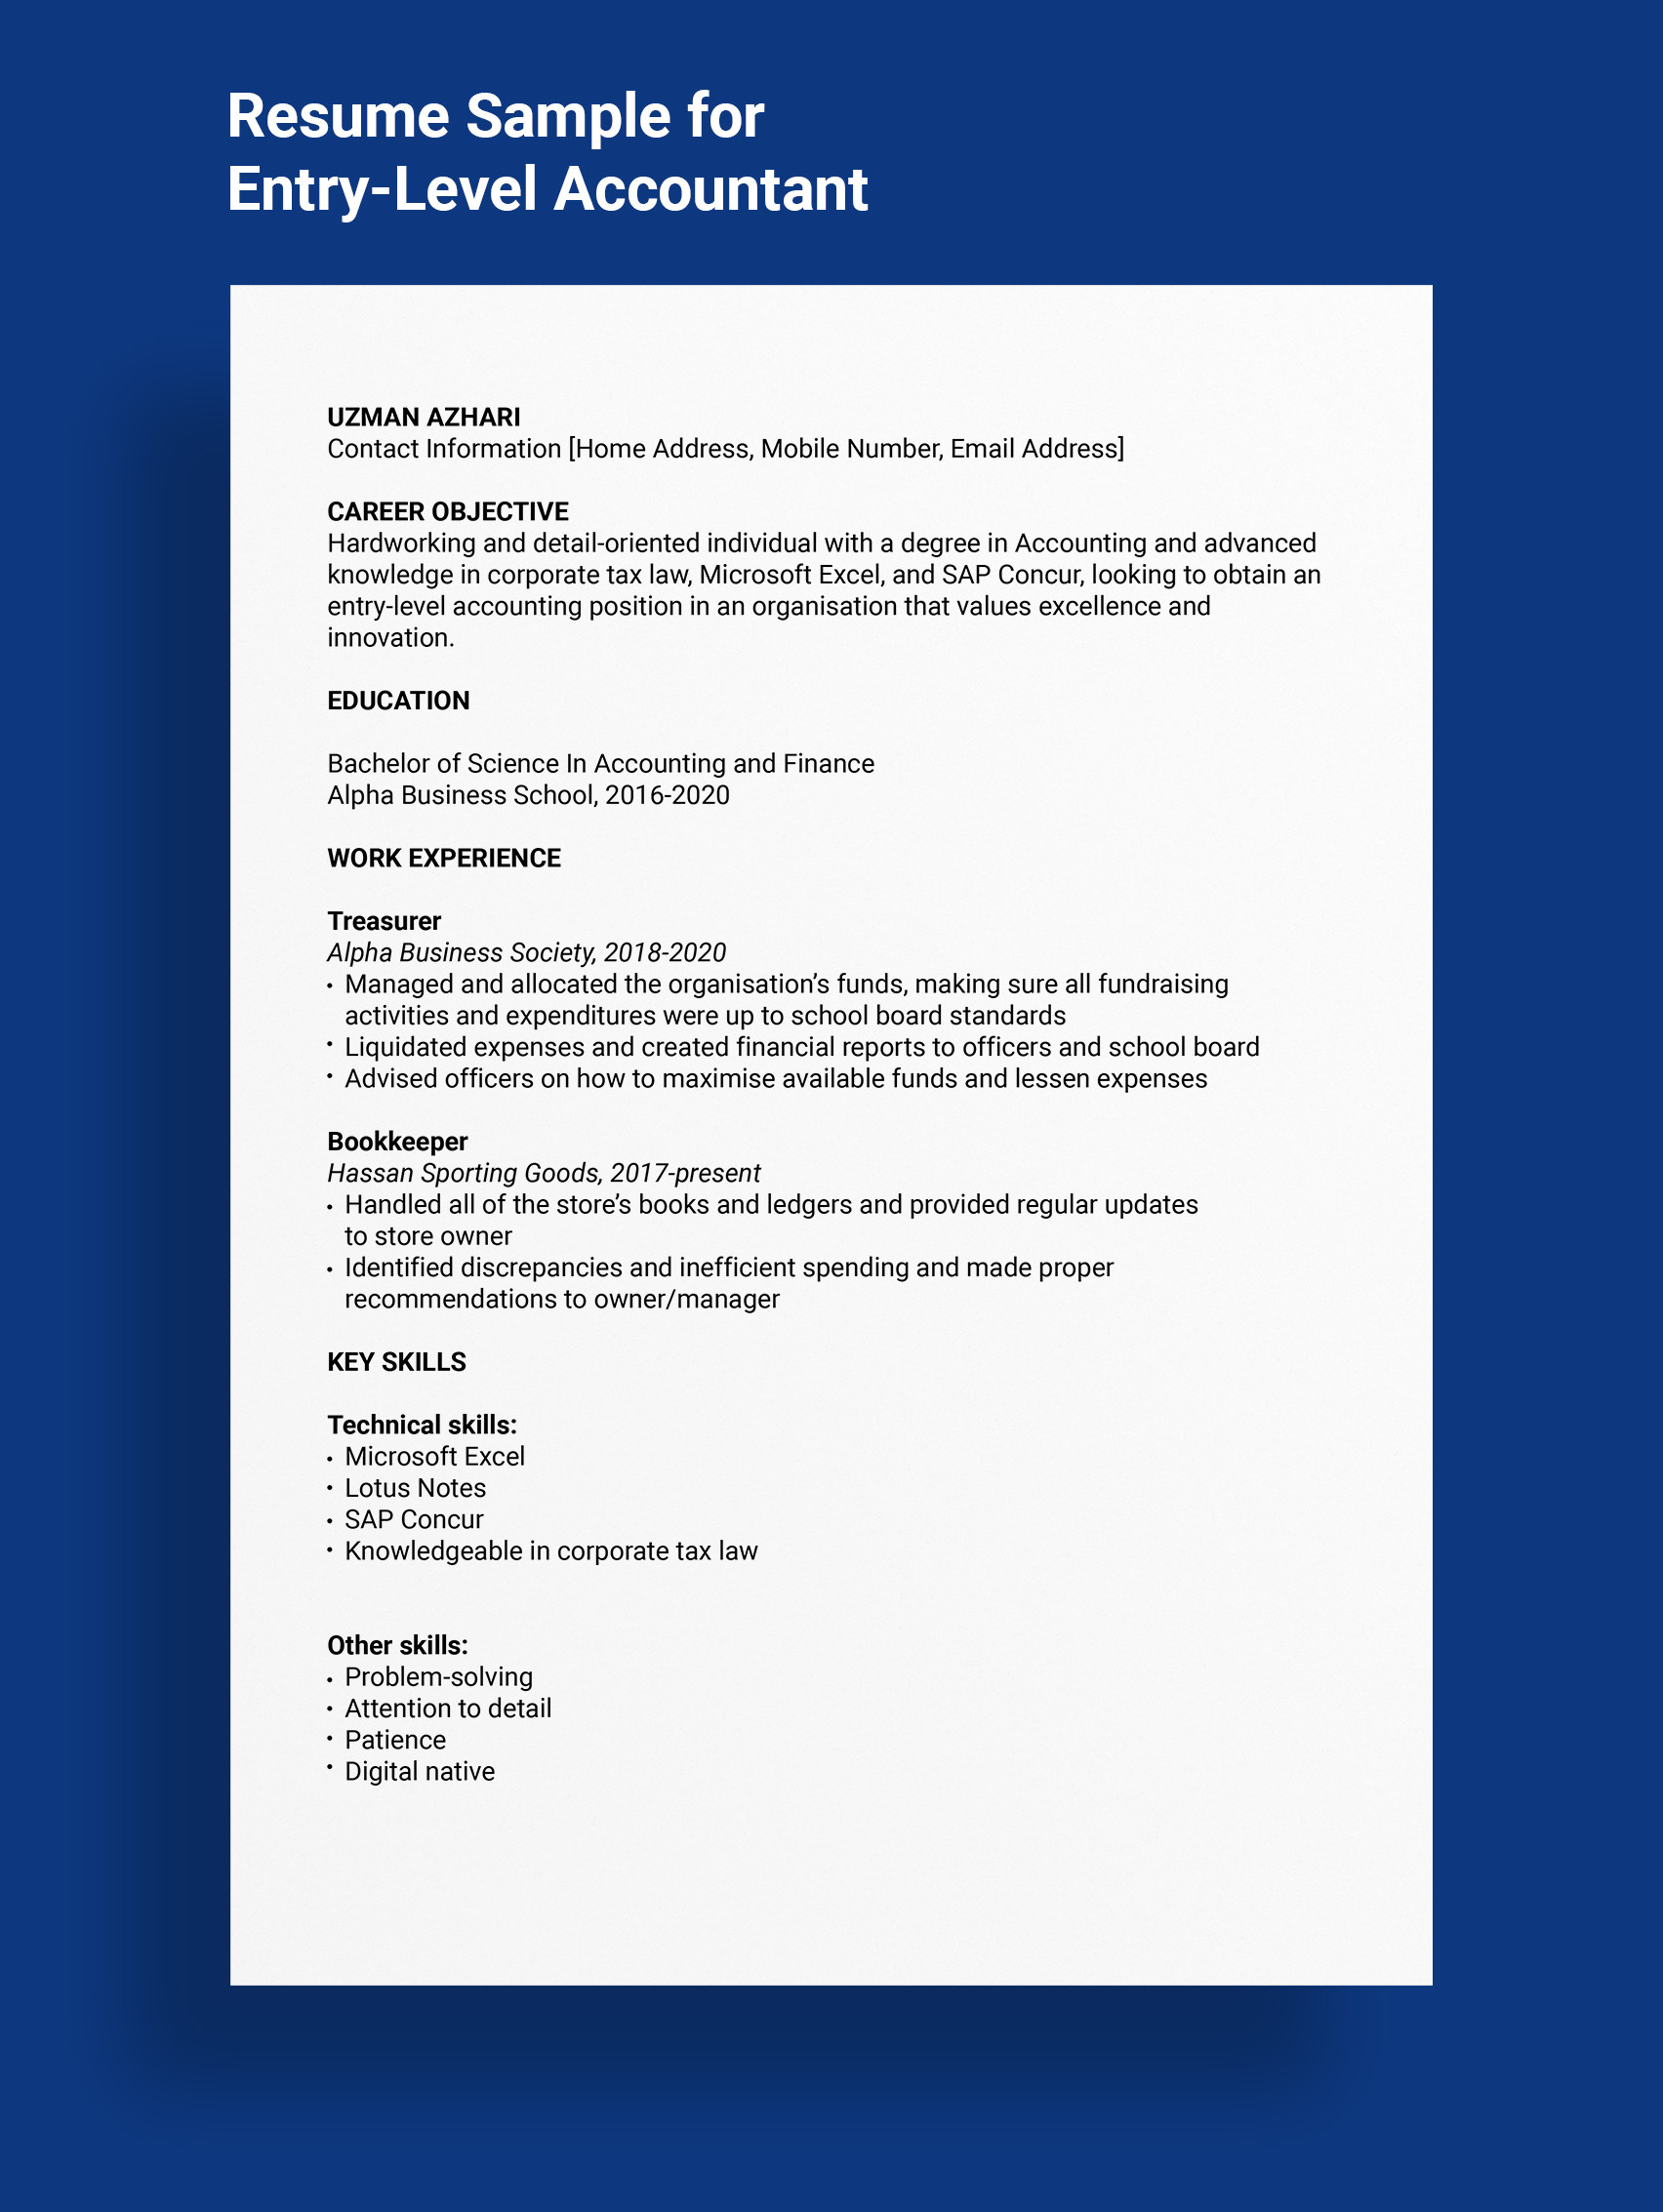 Entry Level Resume Samples for Accounting 3 Things You Need to Have In Your Entry-level Accountant Resume …